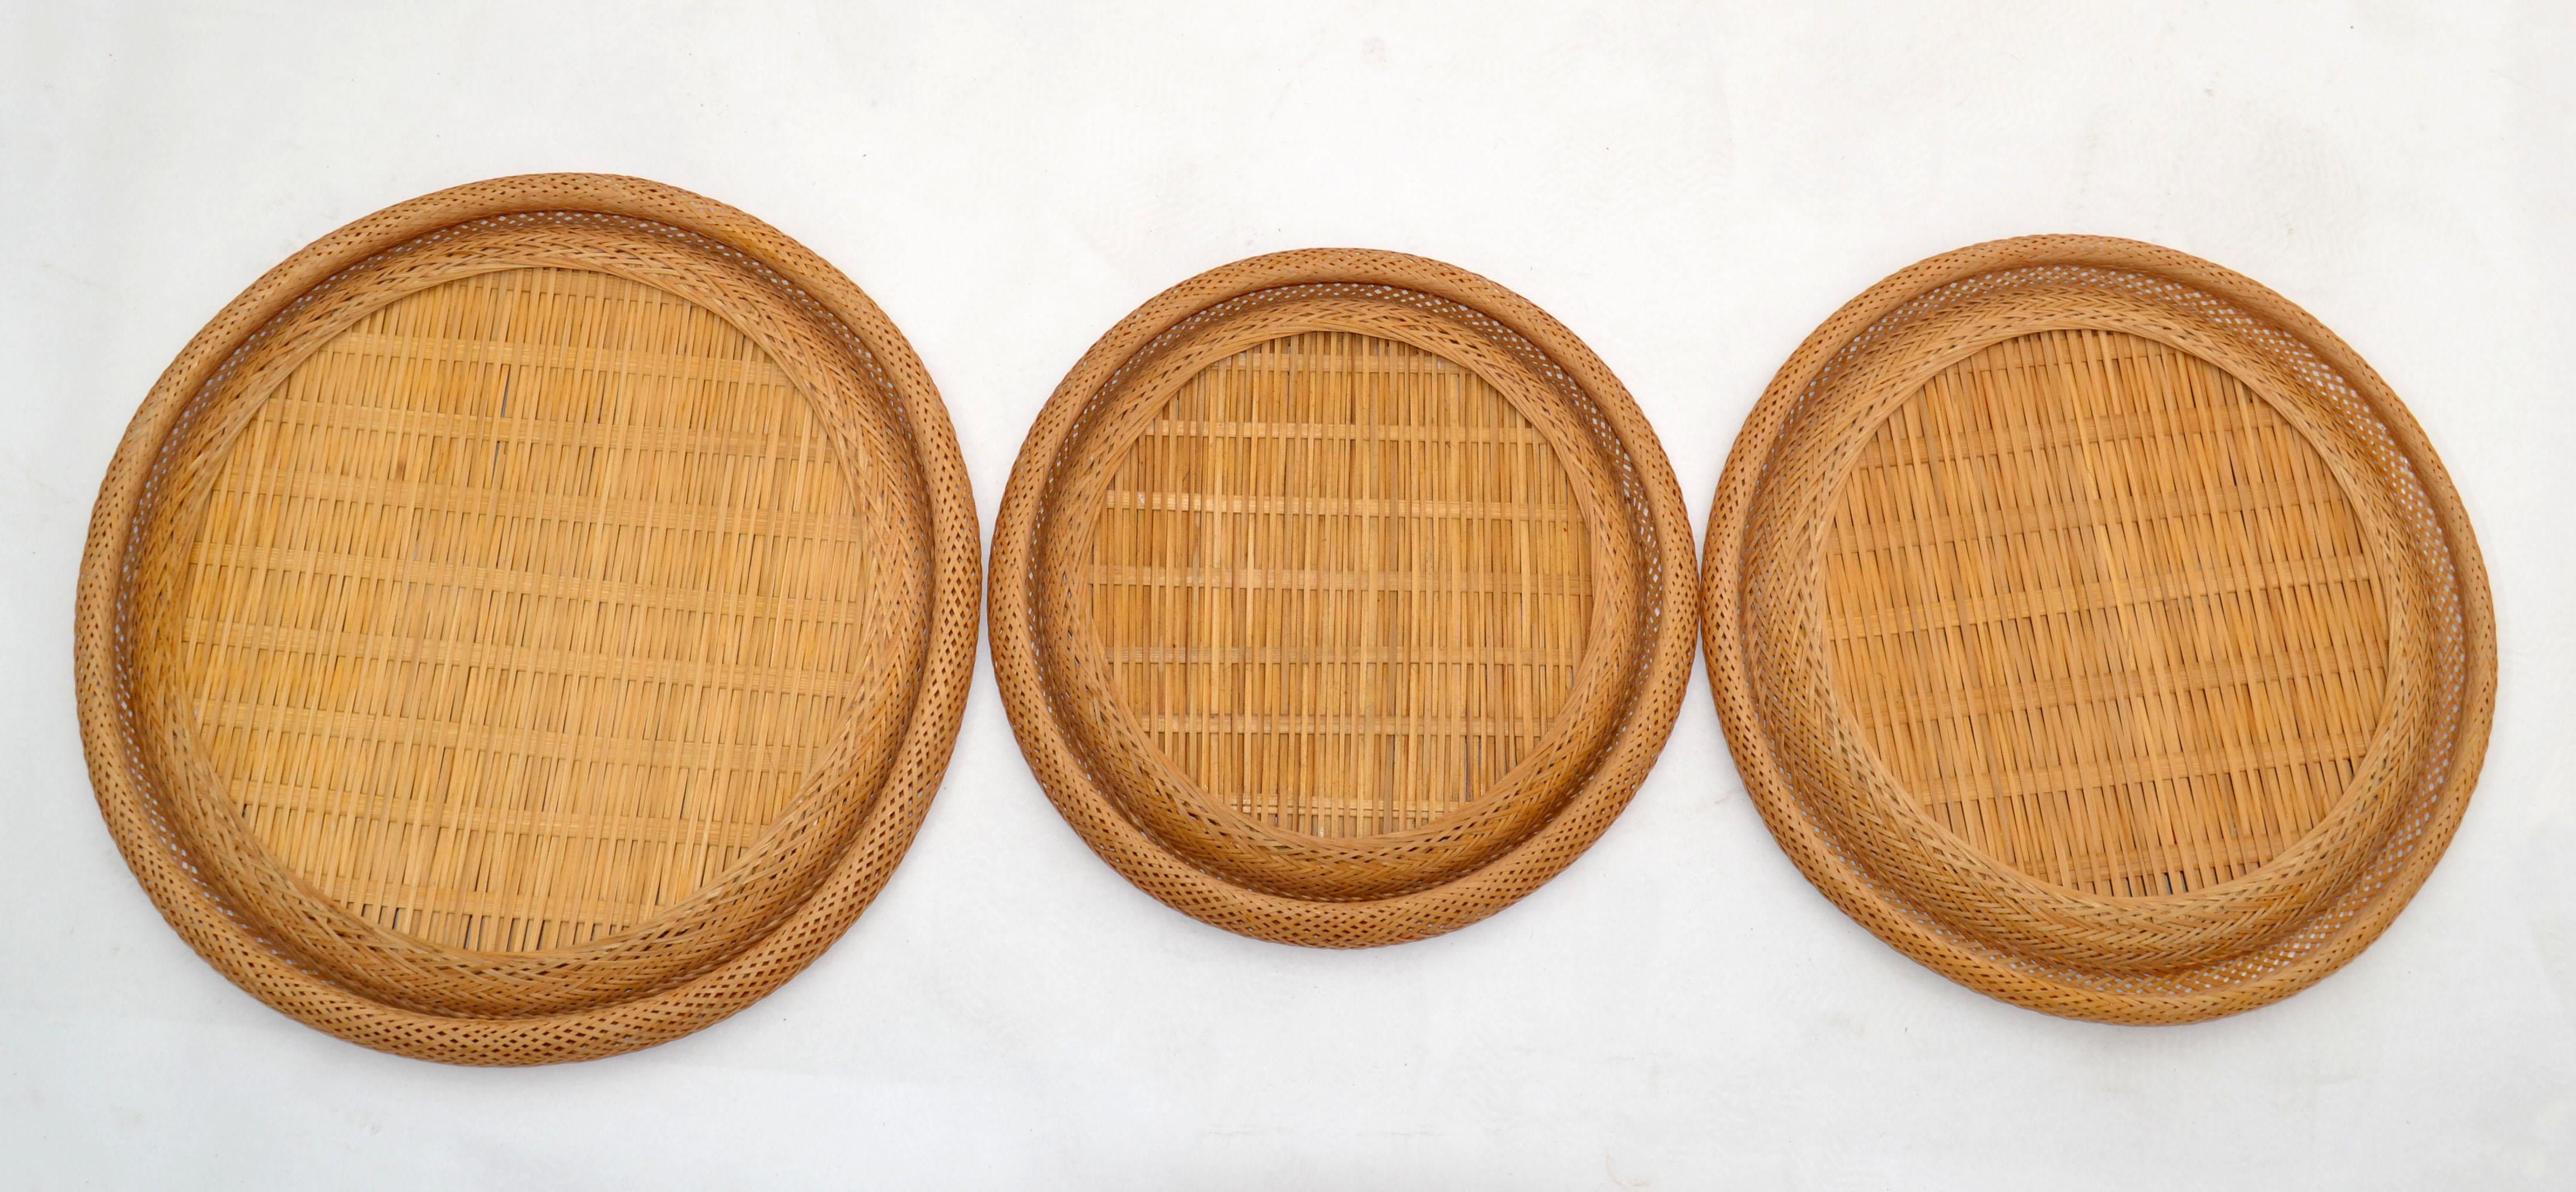 3 Nesting Decorative Handcrafted Cane & Rattan Beaded Wall Plates Peacock Motif For Sale 3